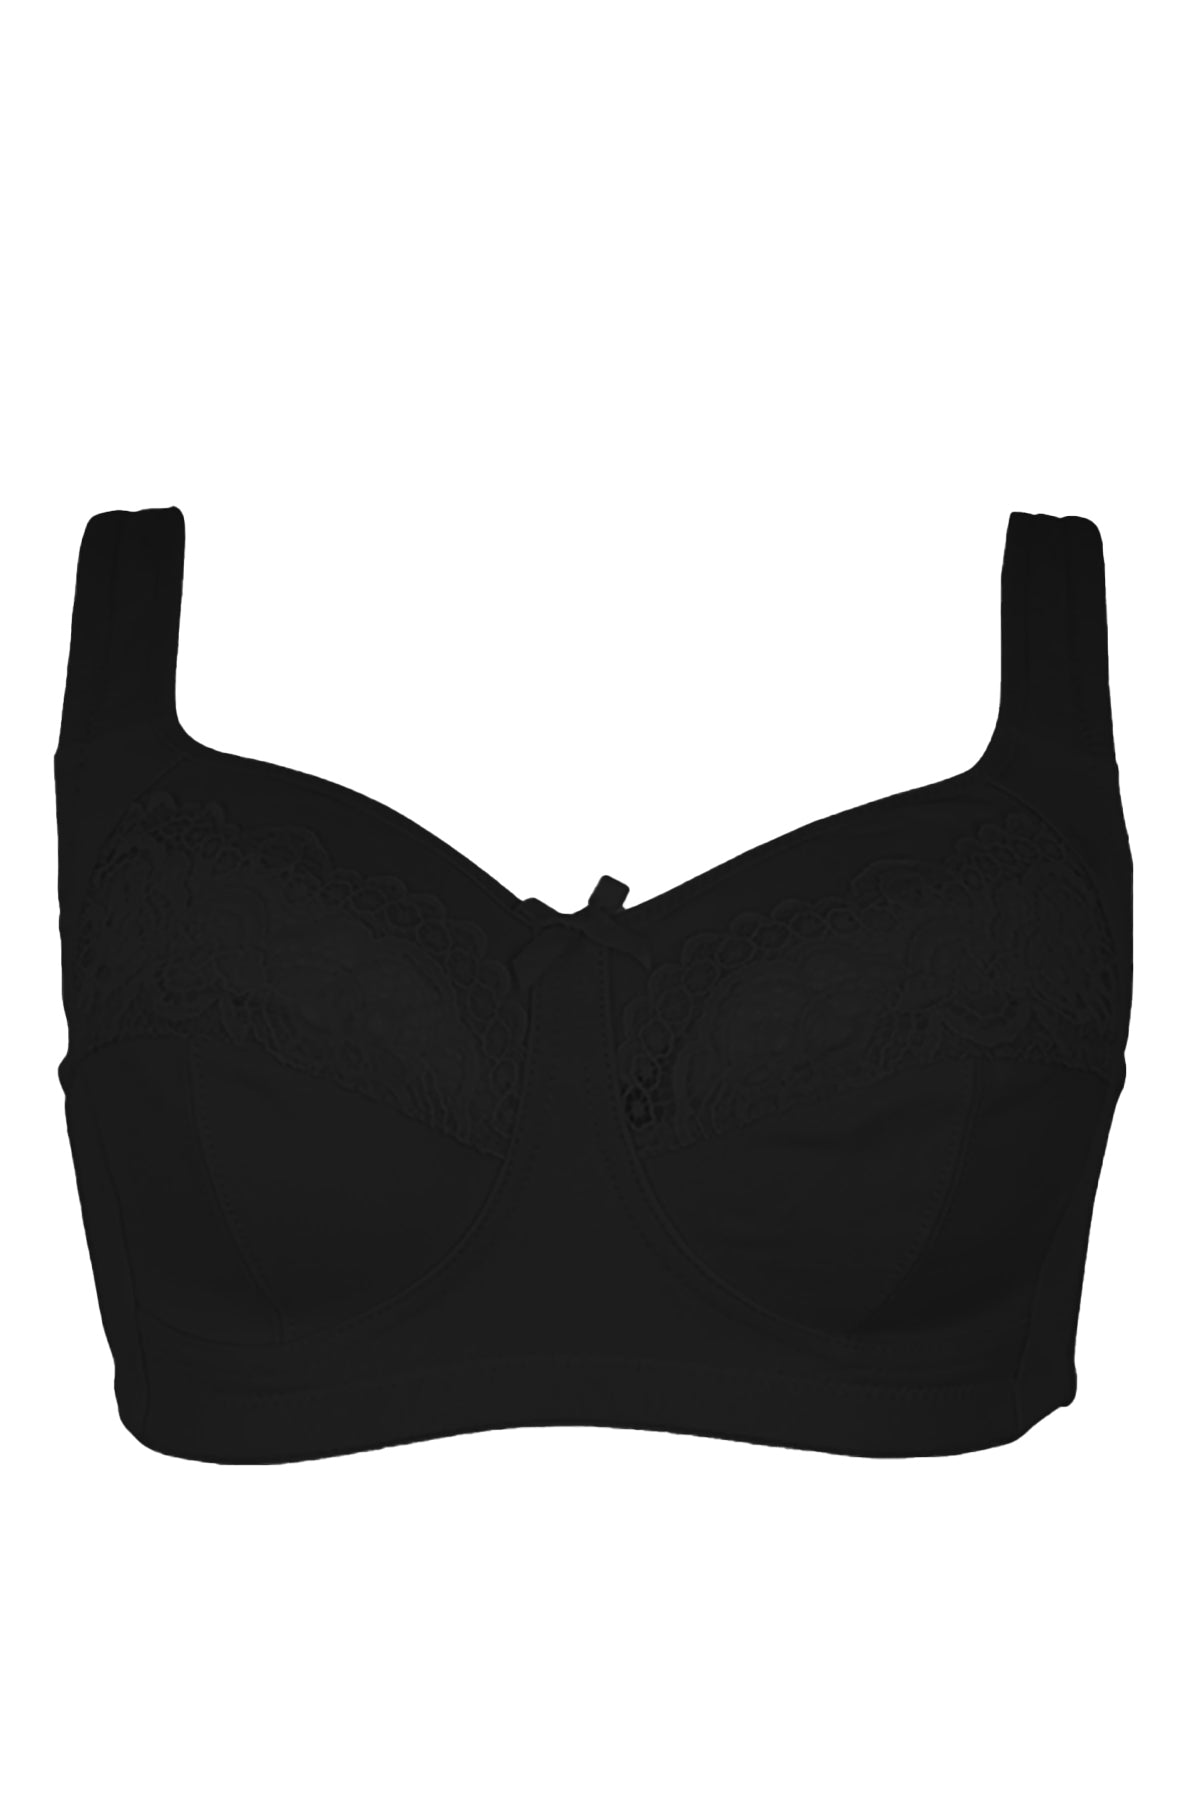 Buy Alishan Black and Blue Cotton Blend Non Padded Bra - 44C (pack